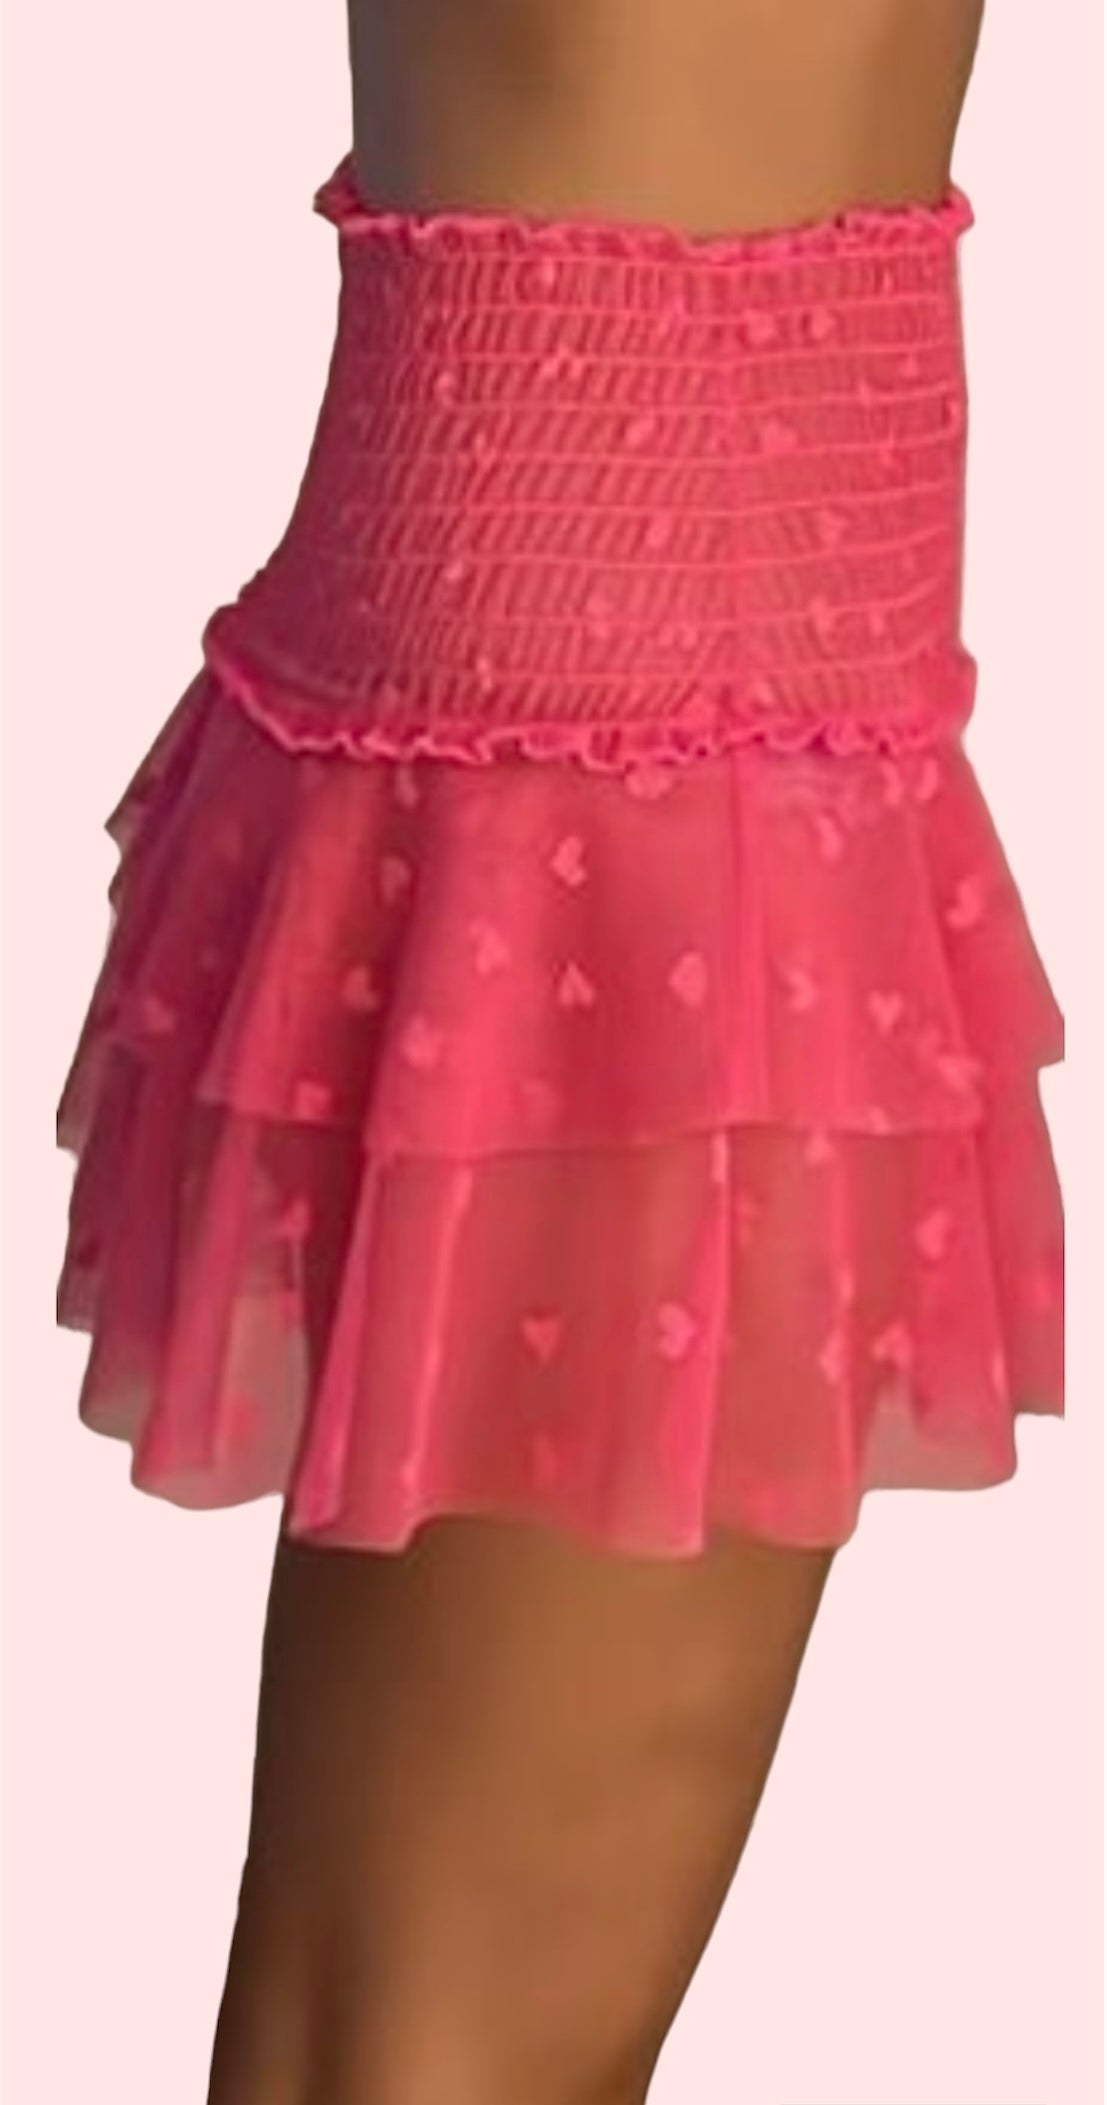 TALIA SKIRT IN HOT PINK HEARTS